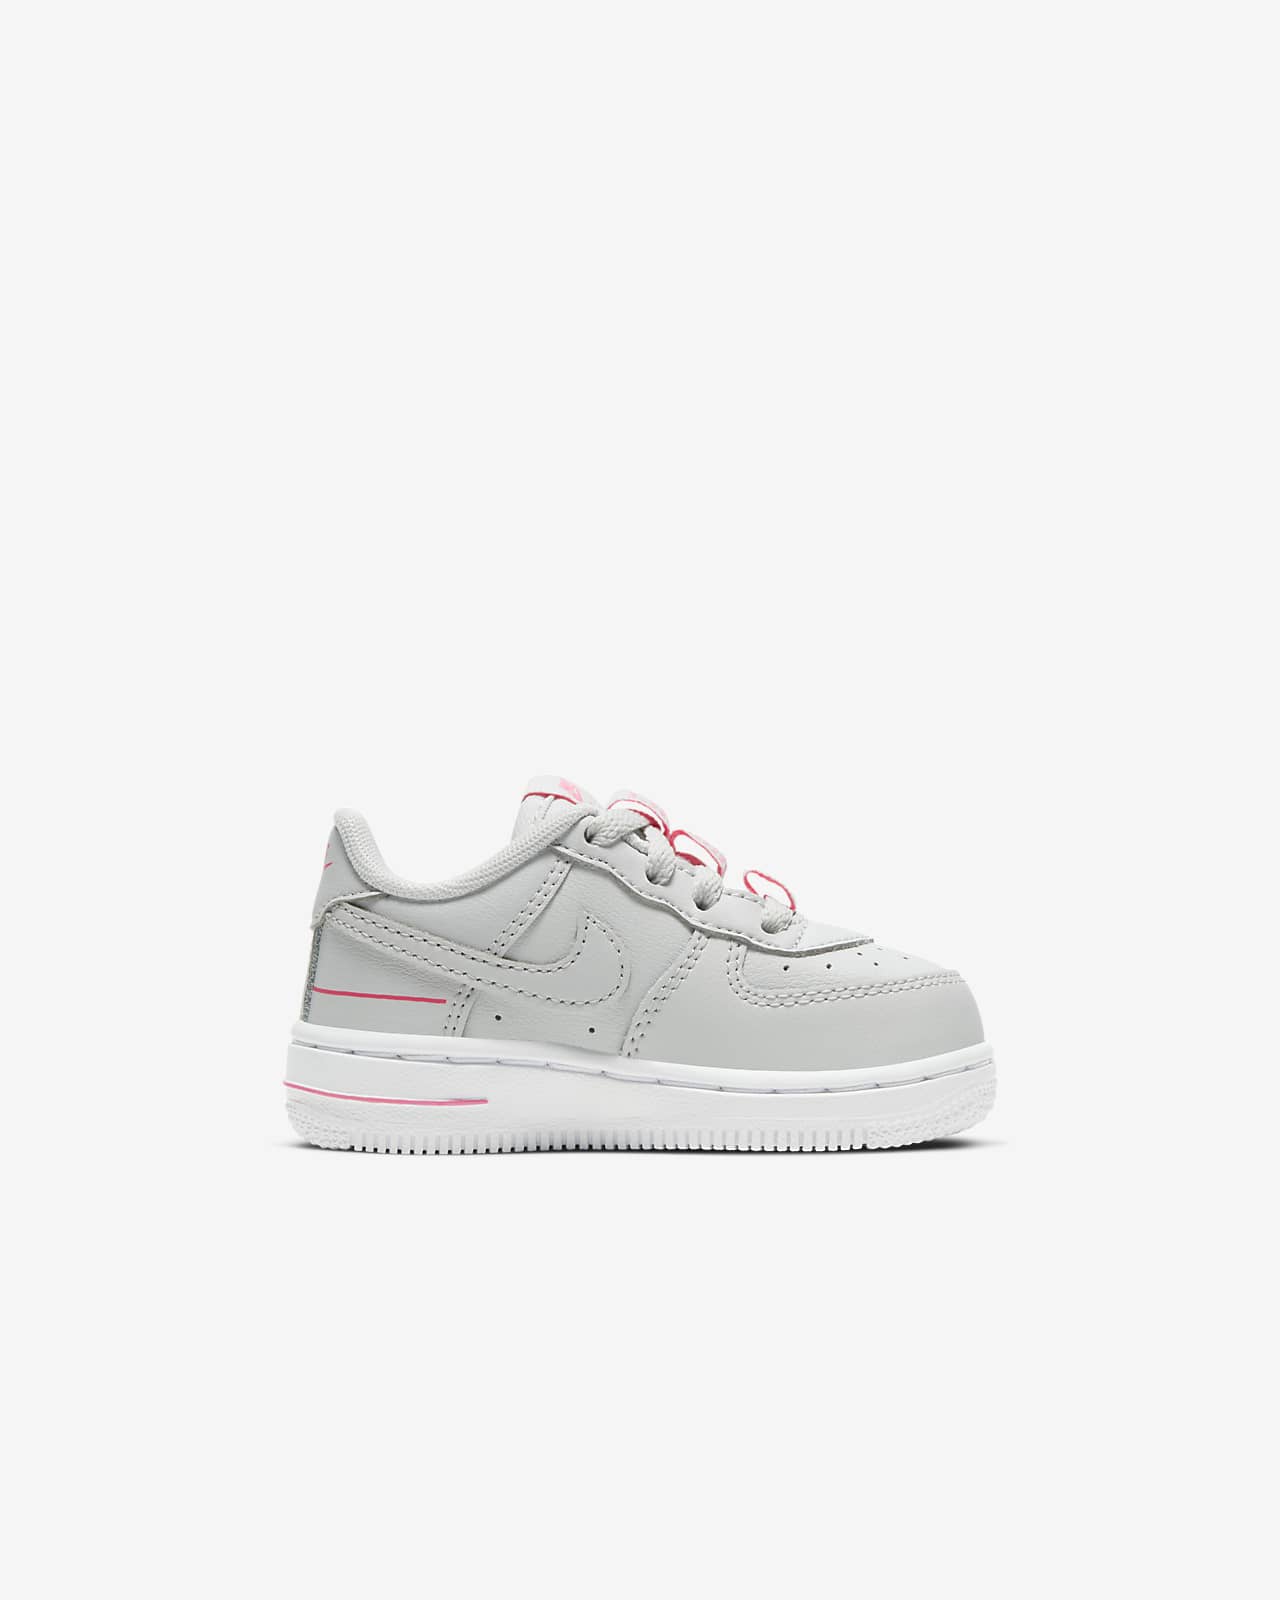 Nike Force 1 LV8 3 Baby and Toddler Shoe